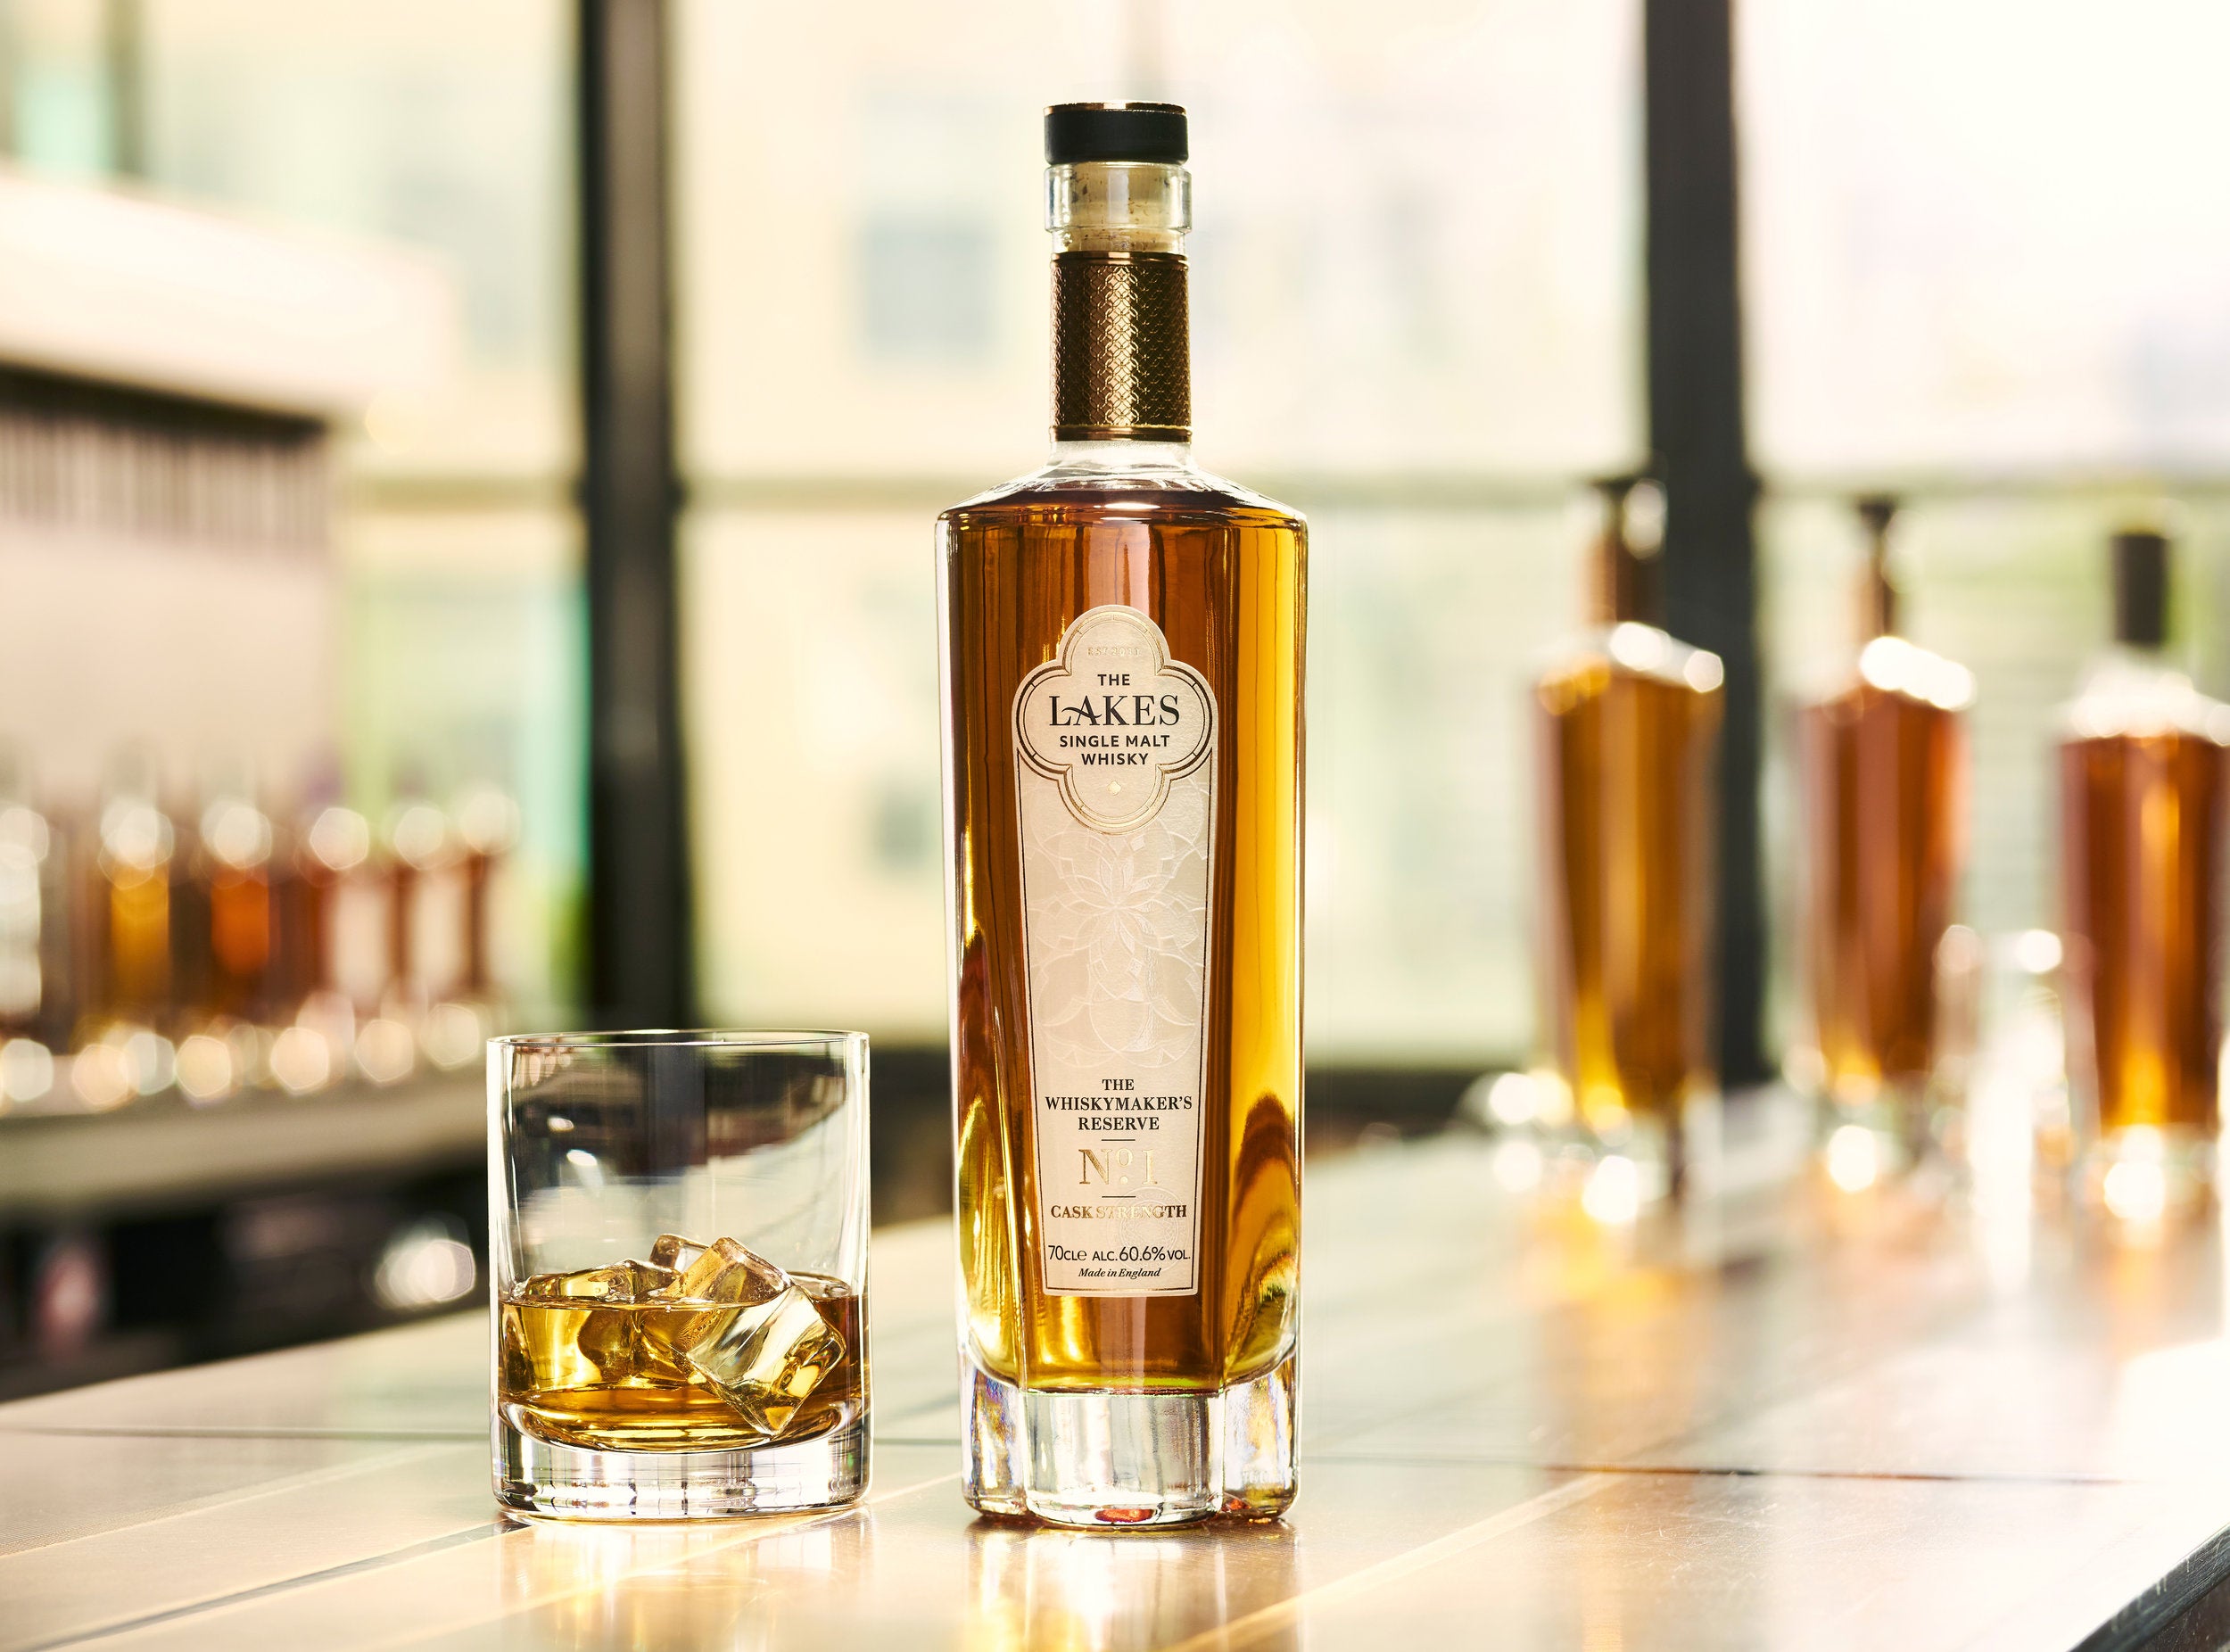 The Whiskymaker’s Reserve by Lakes Distillery